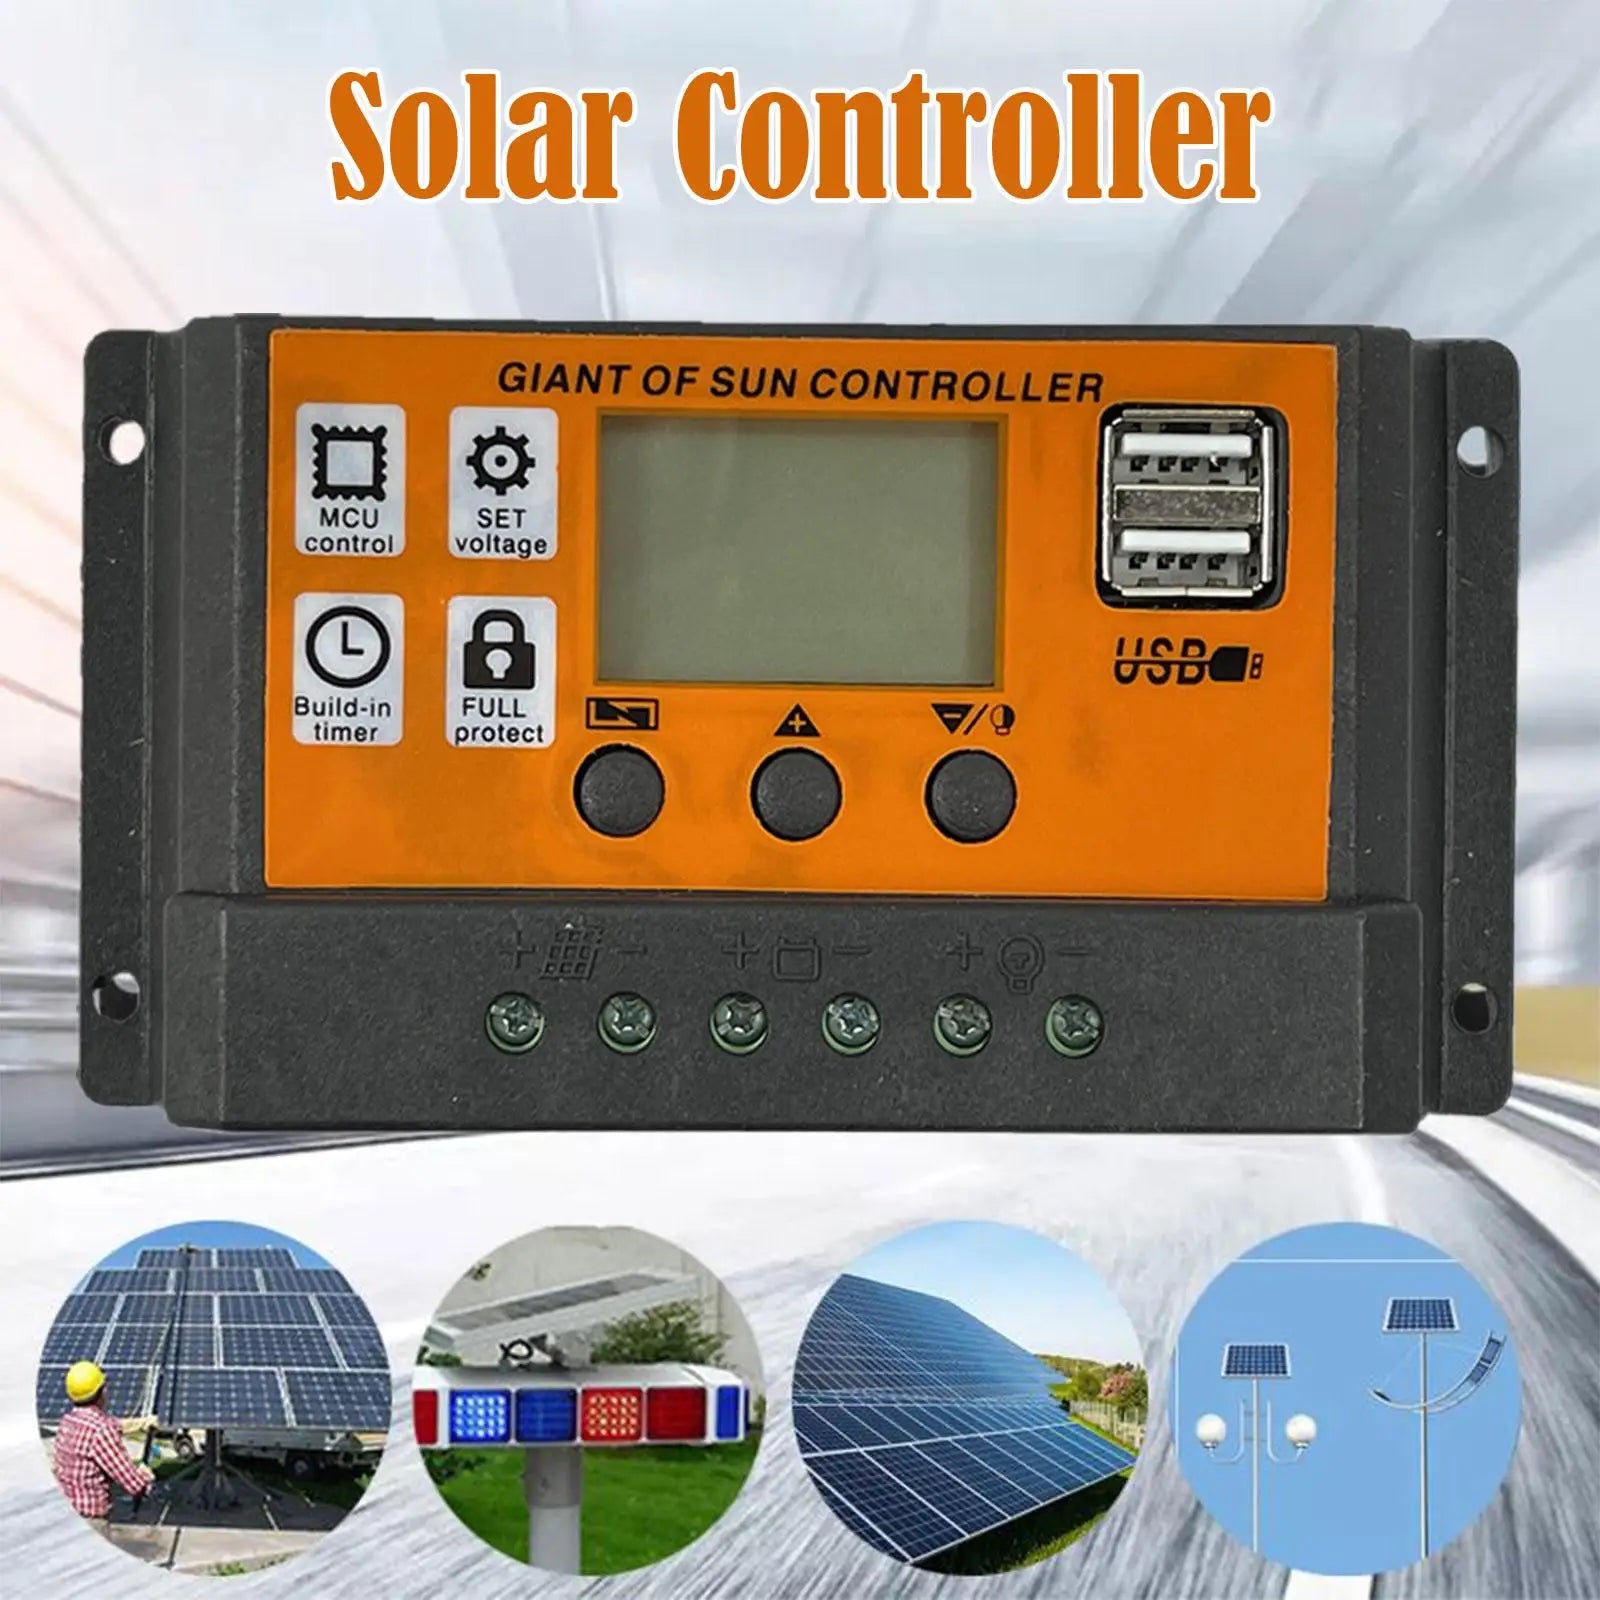 MPPT Solar Charge Controller, Smart solar charger controller with timer and protection features for safe battery charging and voltage regulation.